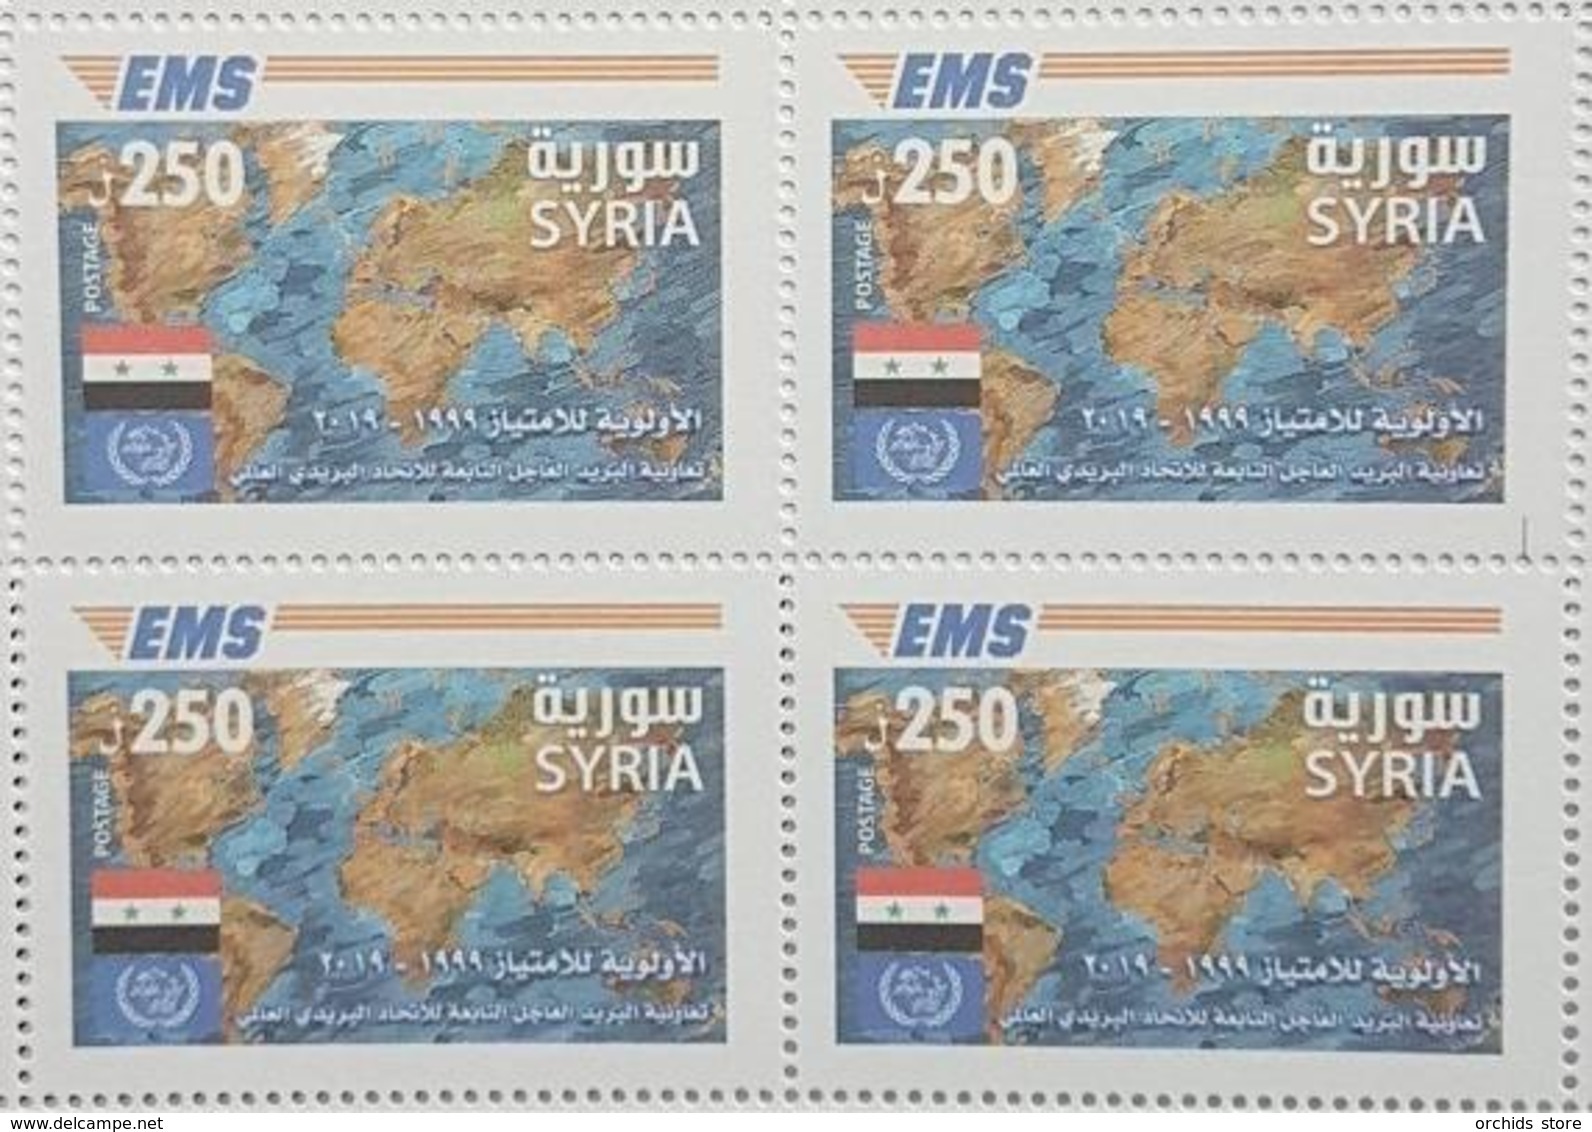 Syria New 2019 MNH Stamp - EMS - Express Mail Service - Worldwide Joint Issue - Blk/4 - Syria